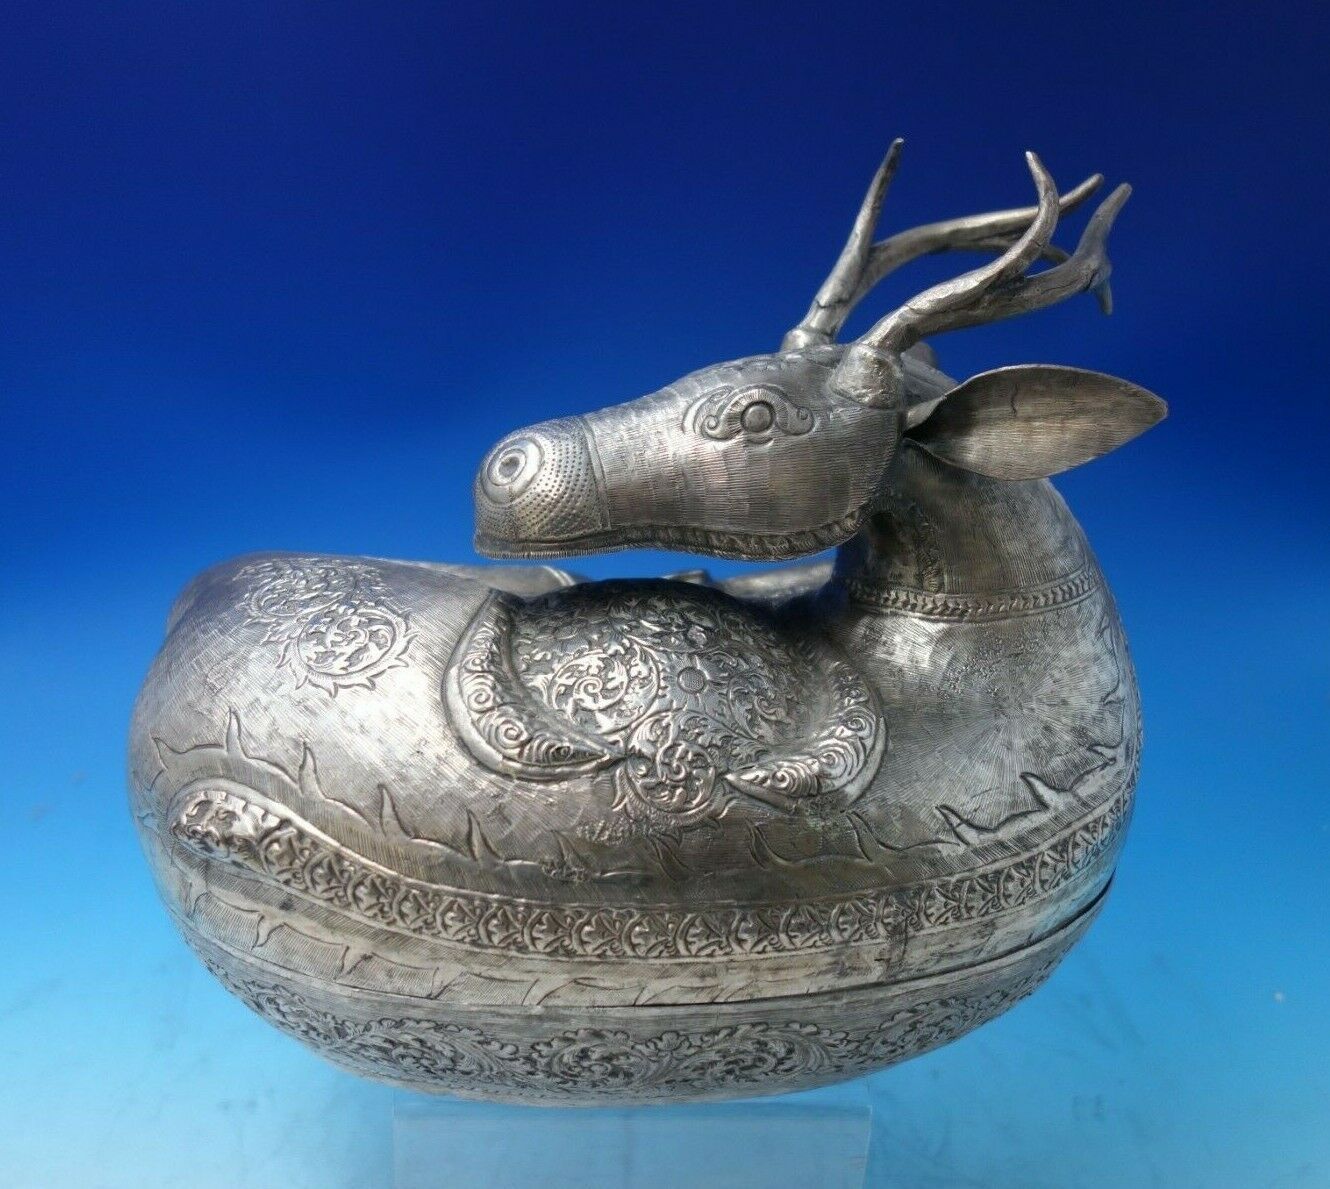 Primary image for Asian .700-.800 Silver Box Deer Form Handwrought 9" Tall 29.27 ozt. (#5852)